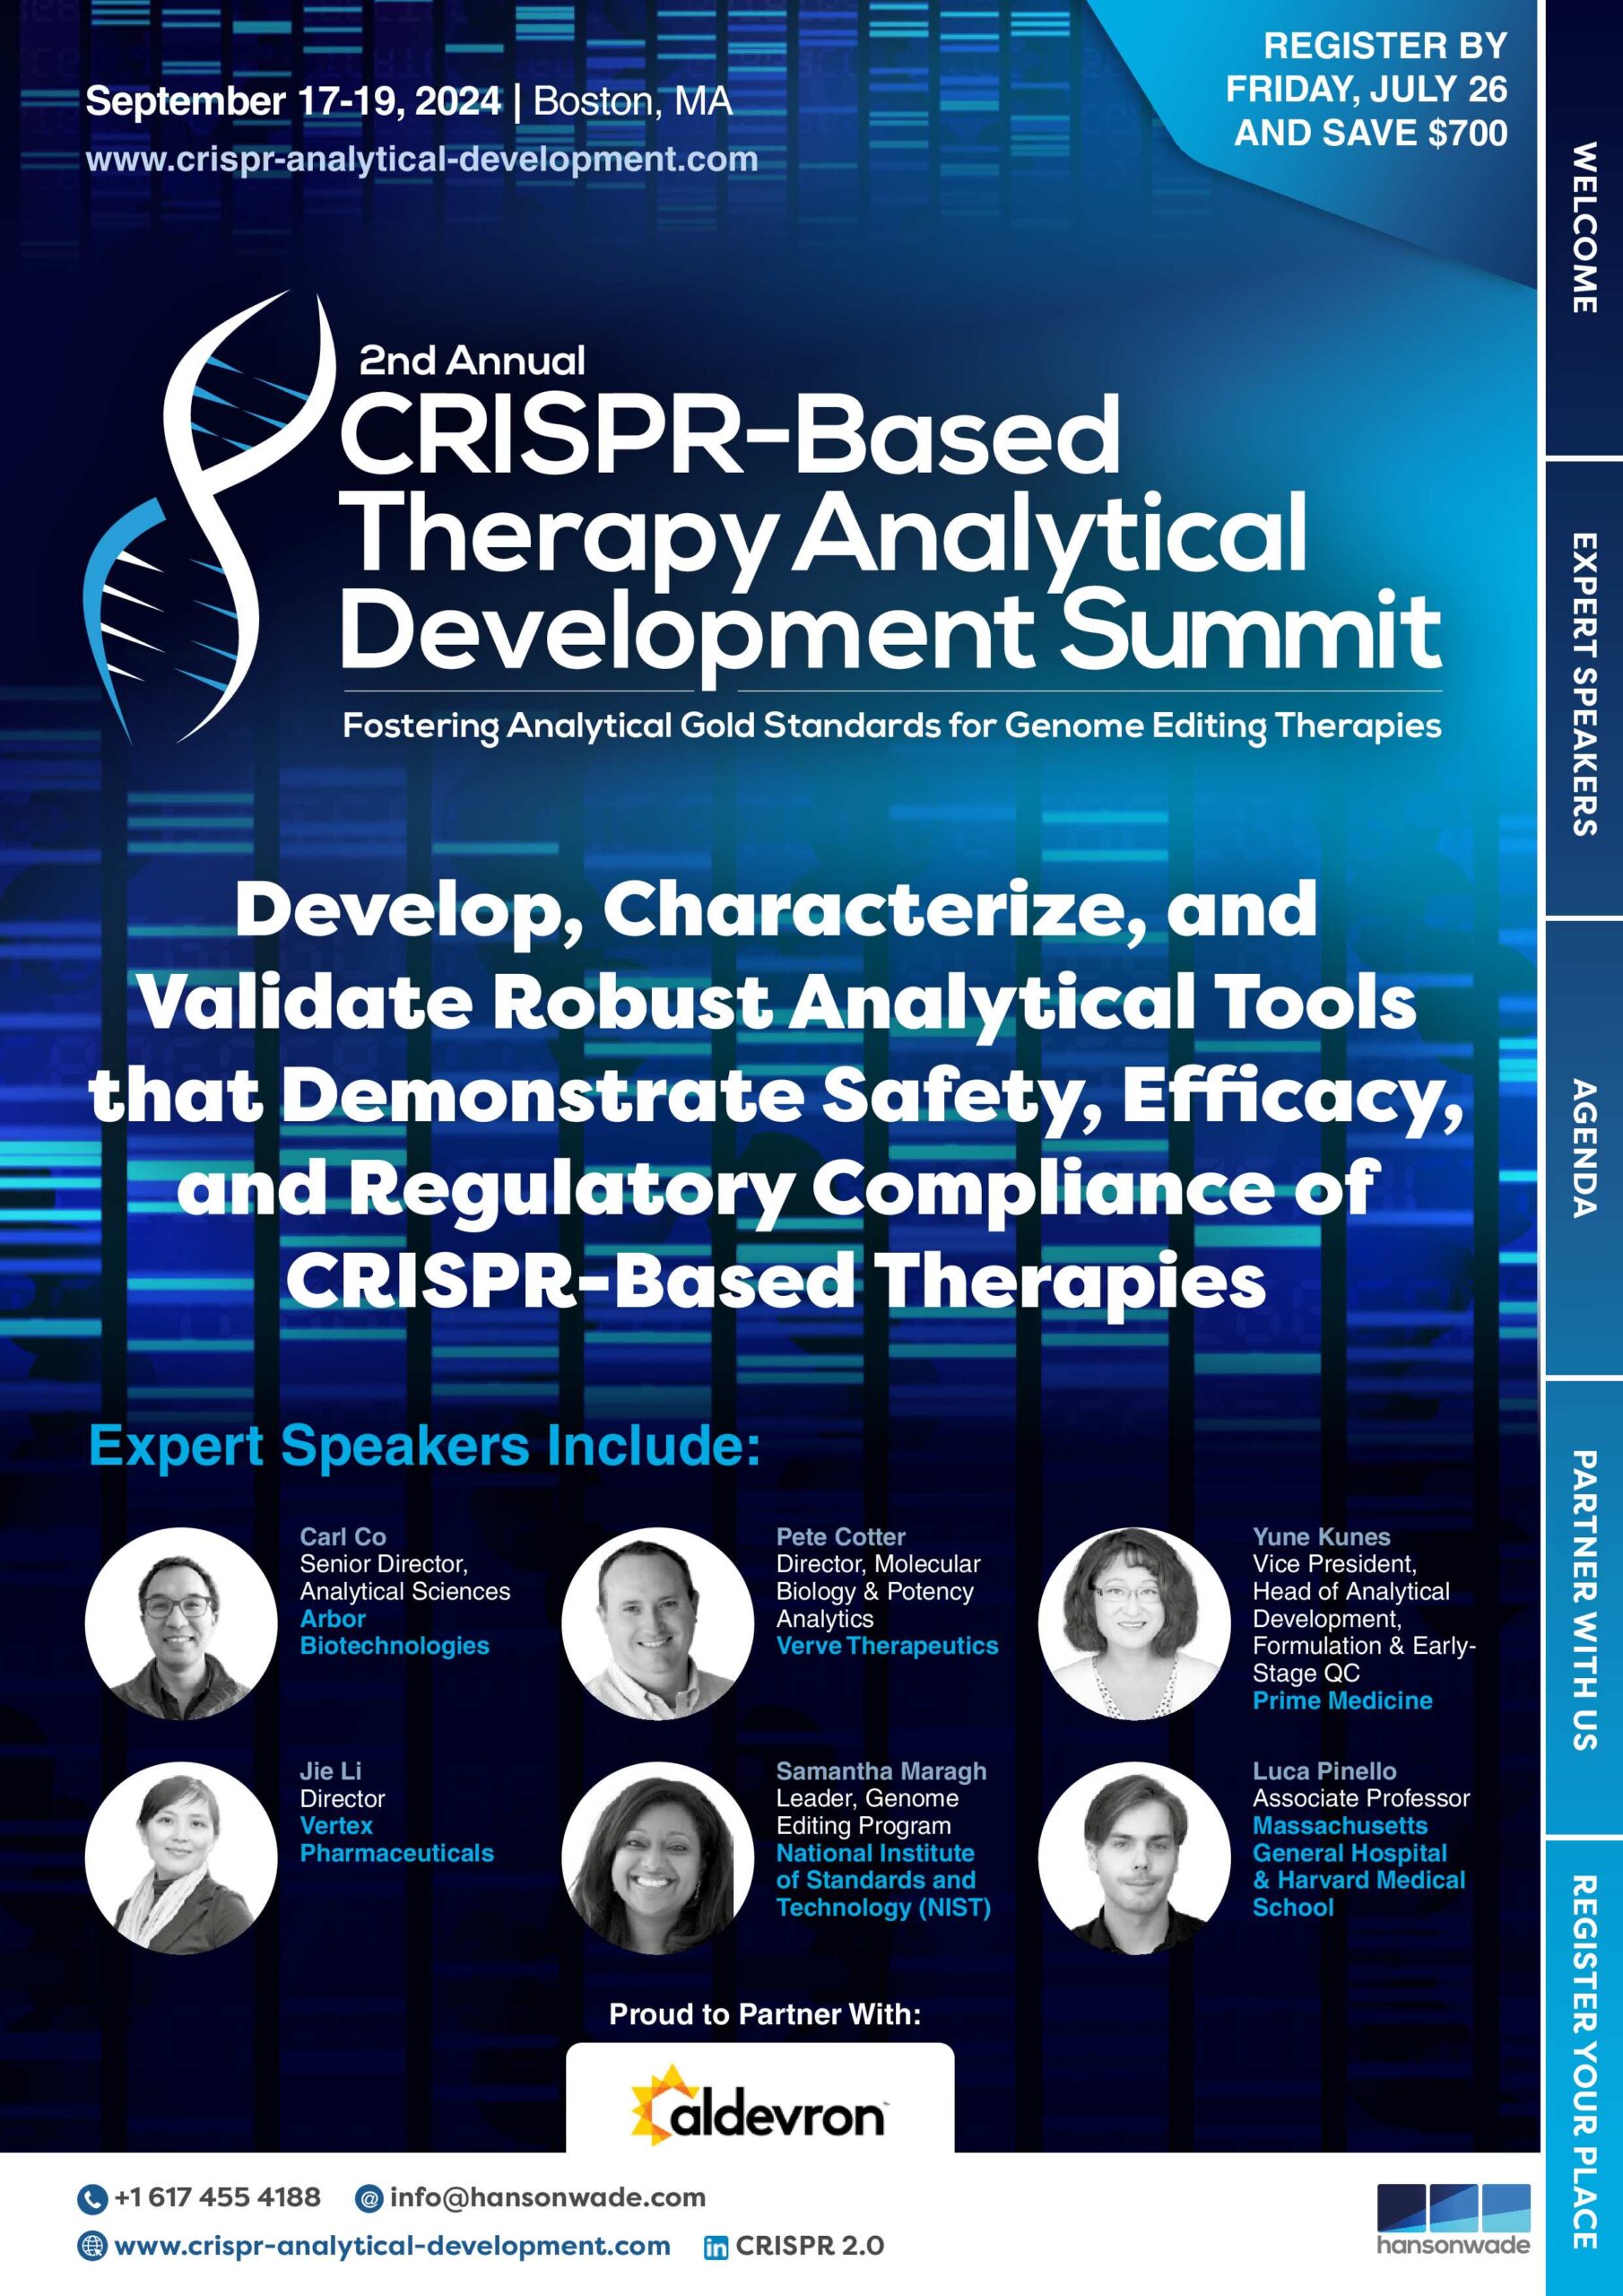 2nd CRISPR-Based Therapy Analytical Development - 2024 Event Guide